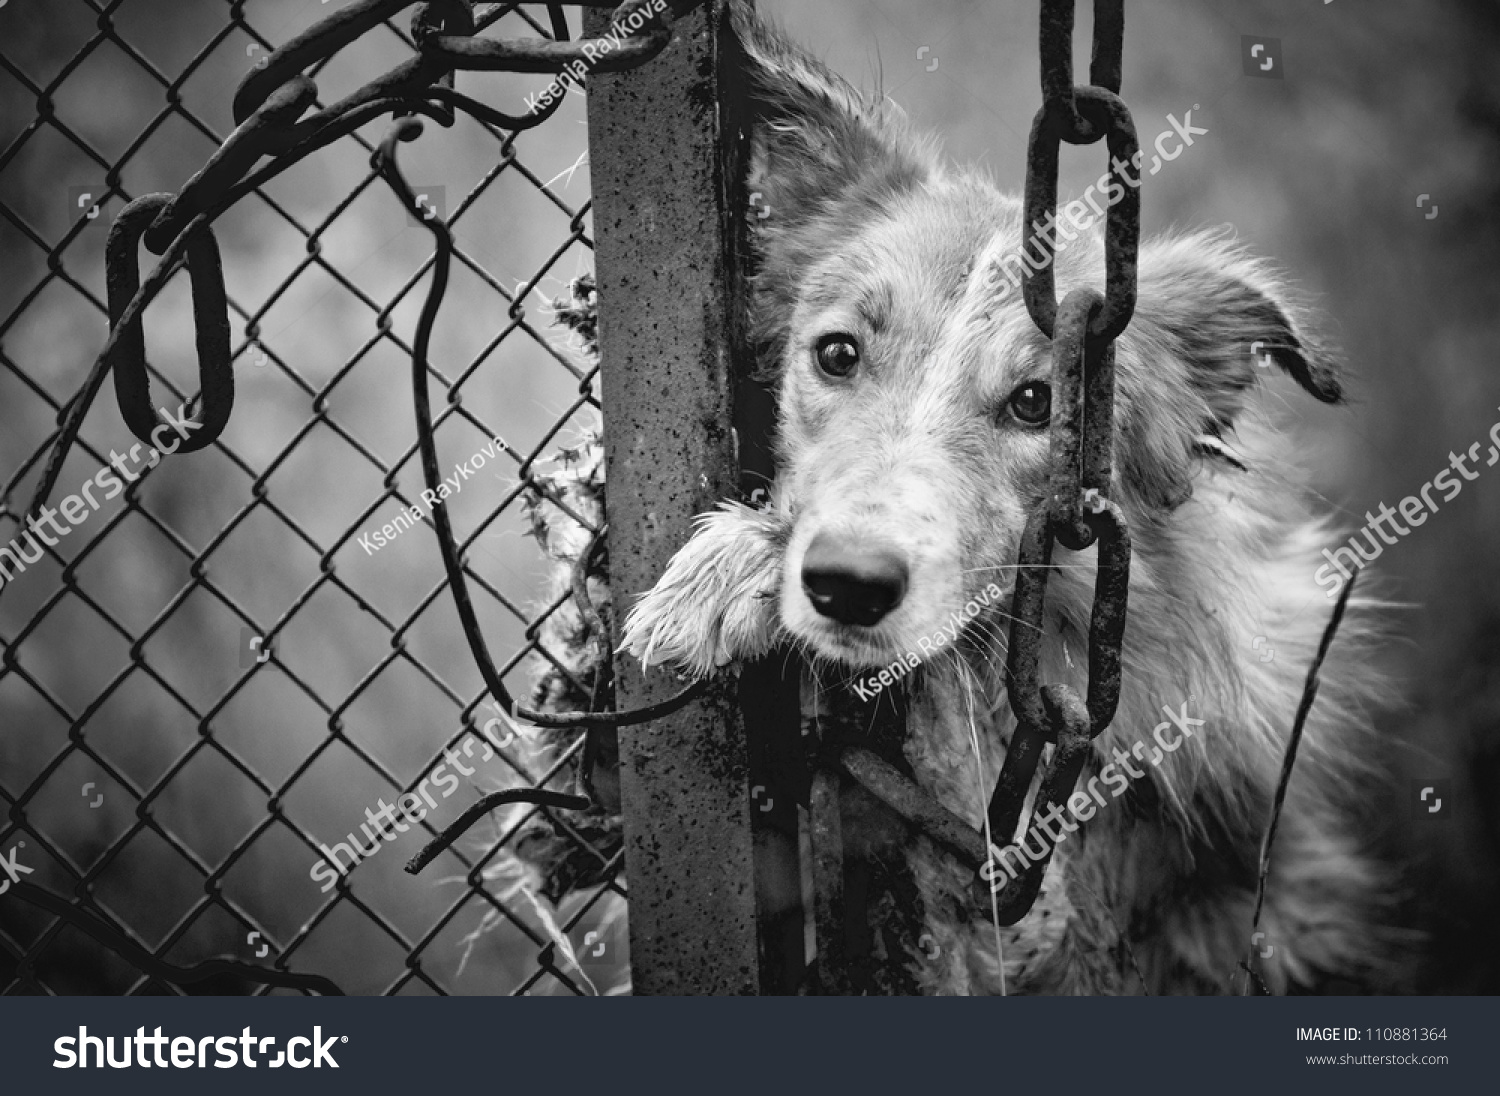 Sad Dirty Dog Black And White On Fence Stock Photo 110881364 : Shutterstock